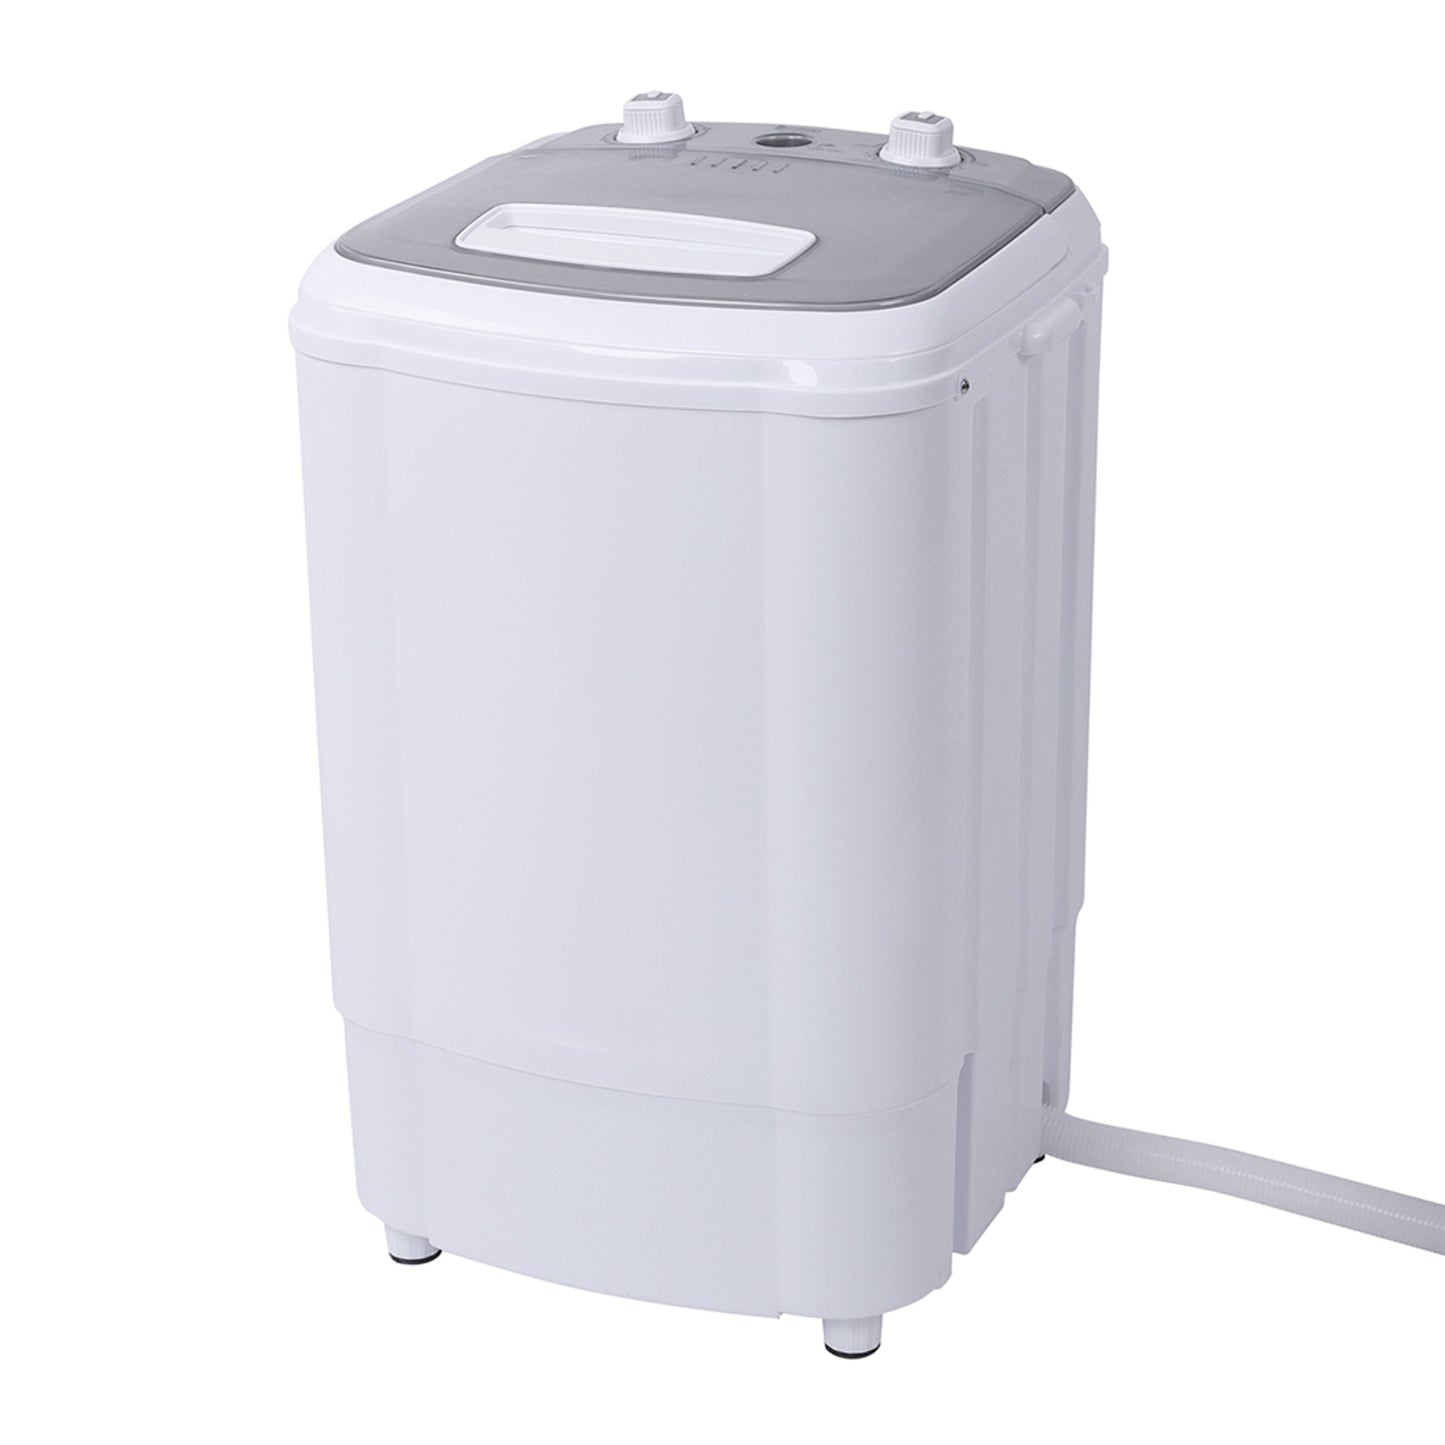 XPB38-ZK3 Compact Single Tub with Built-in Drain Pump